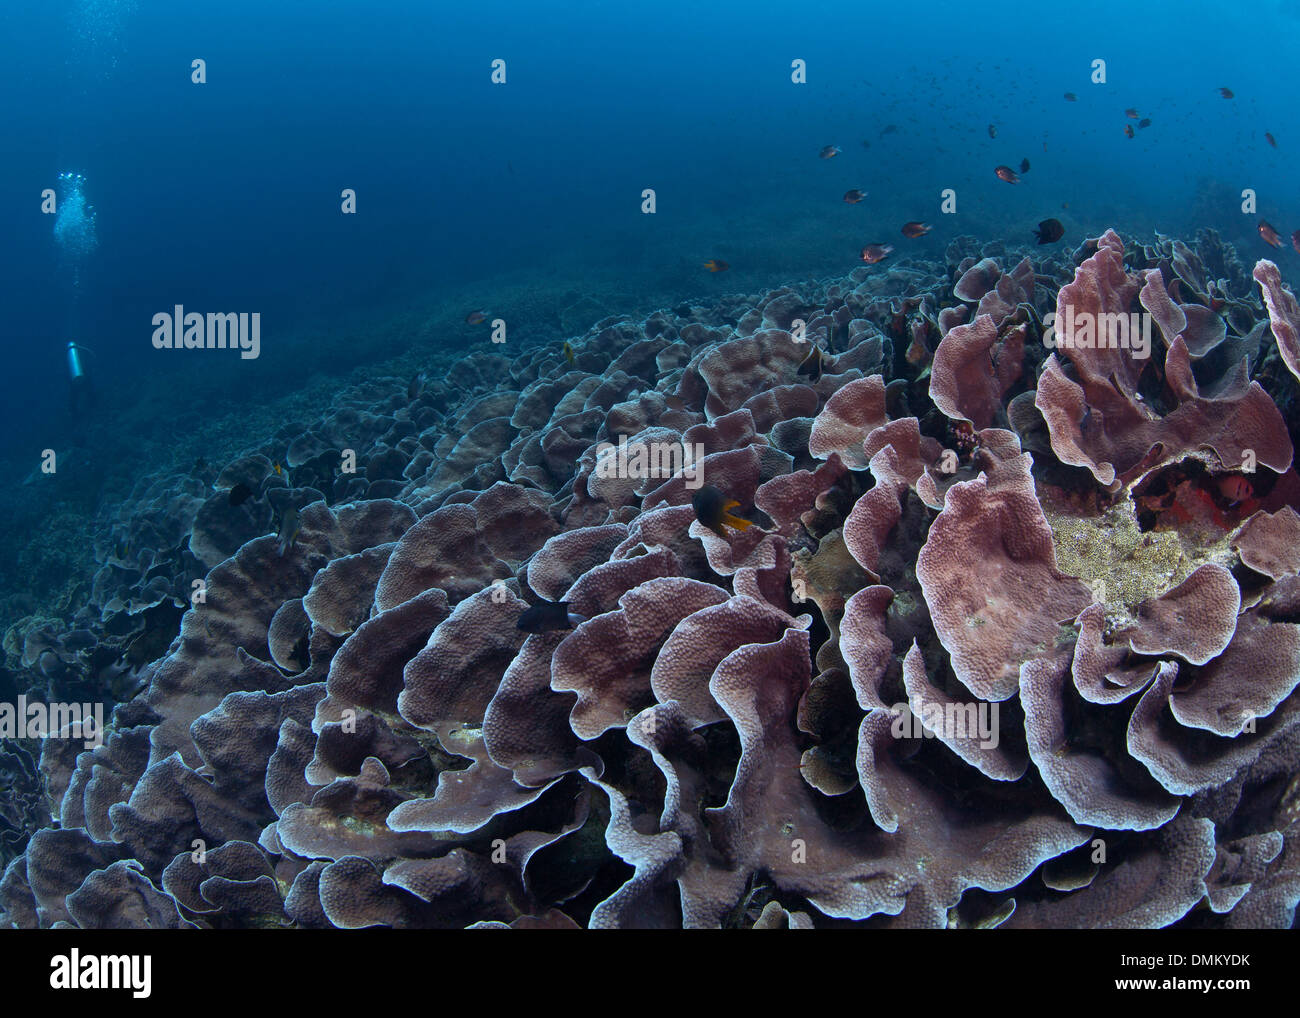 Leaf plate corals (Montipora sp.) with diver in background. Stock Photo